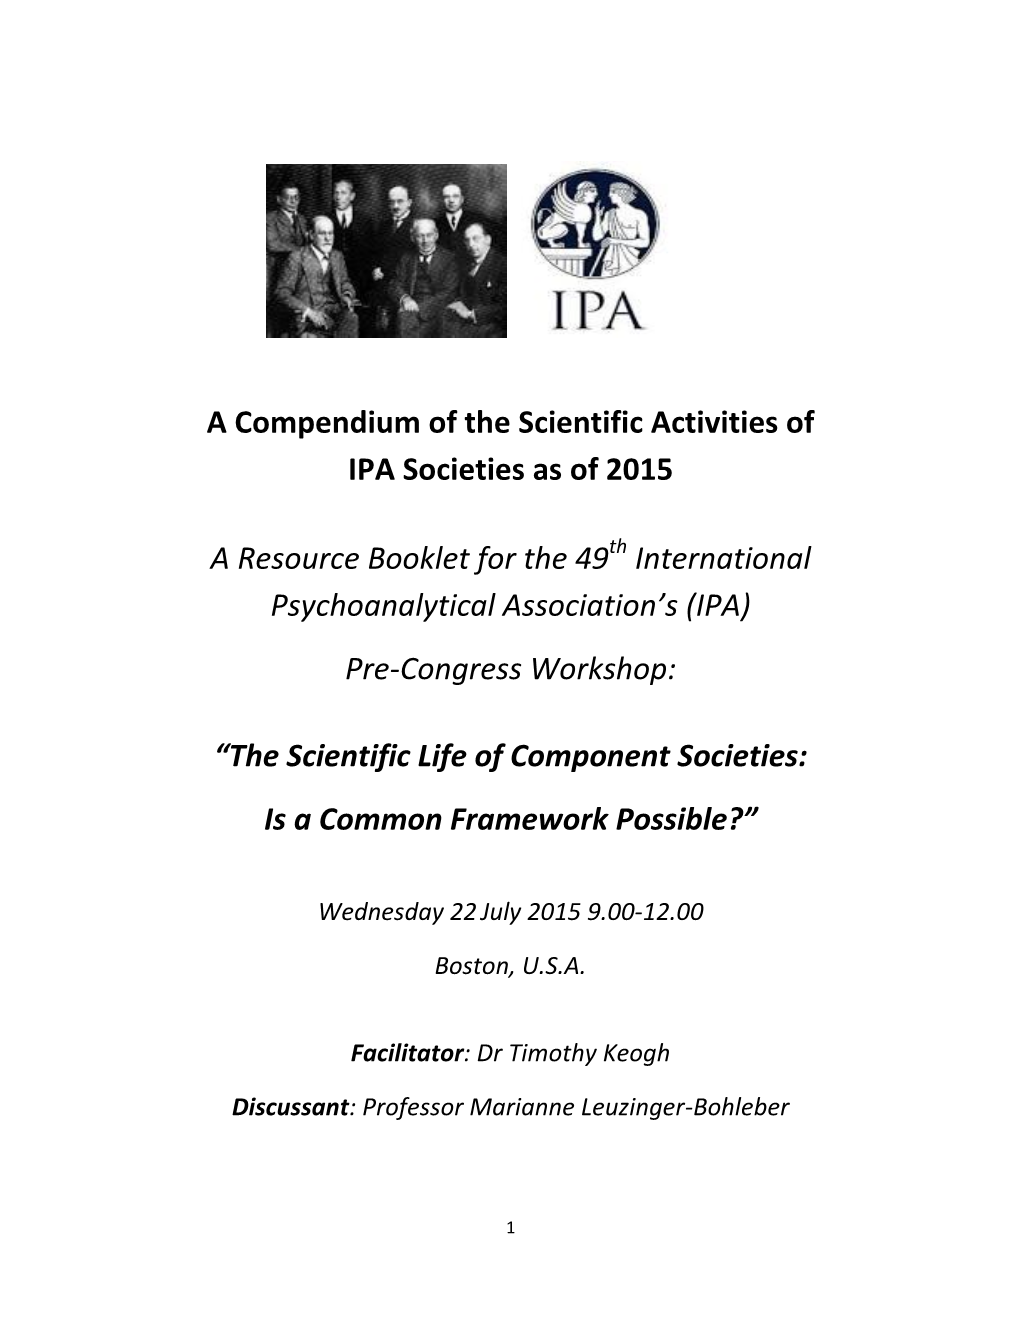 A Compendium of the Scientific Activities of IPA Societies As of 2015 a Resource Booklet for the 49 International Psychoanal